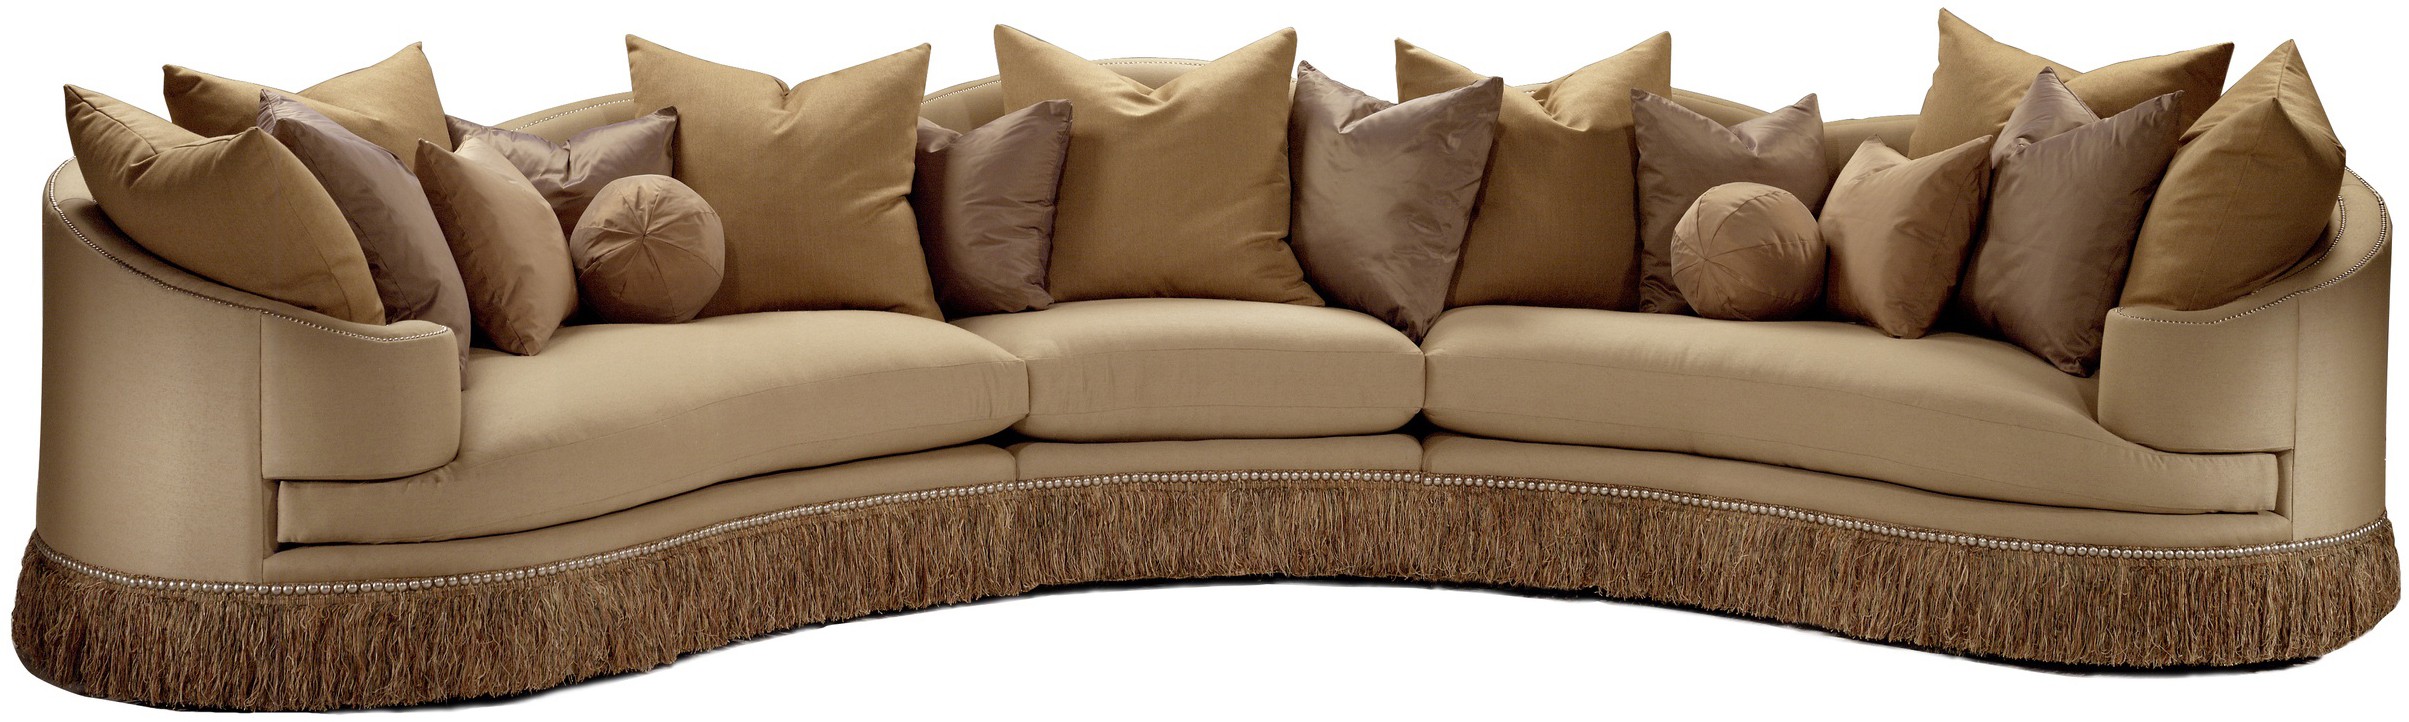 SECTIONALS - Leather & High End Upholstered Furniture Cream colored sofa with luxurious fabric and fringed skirt